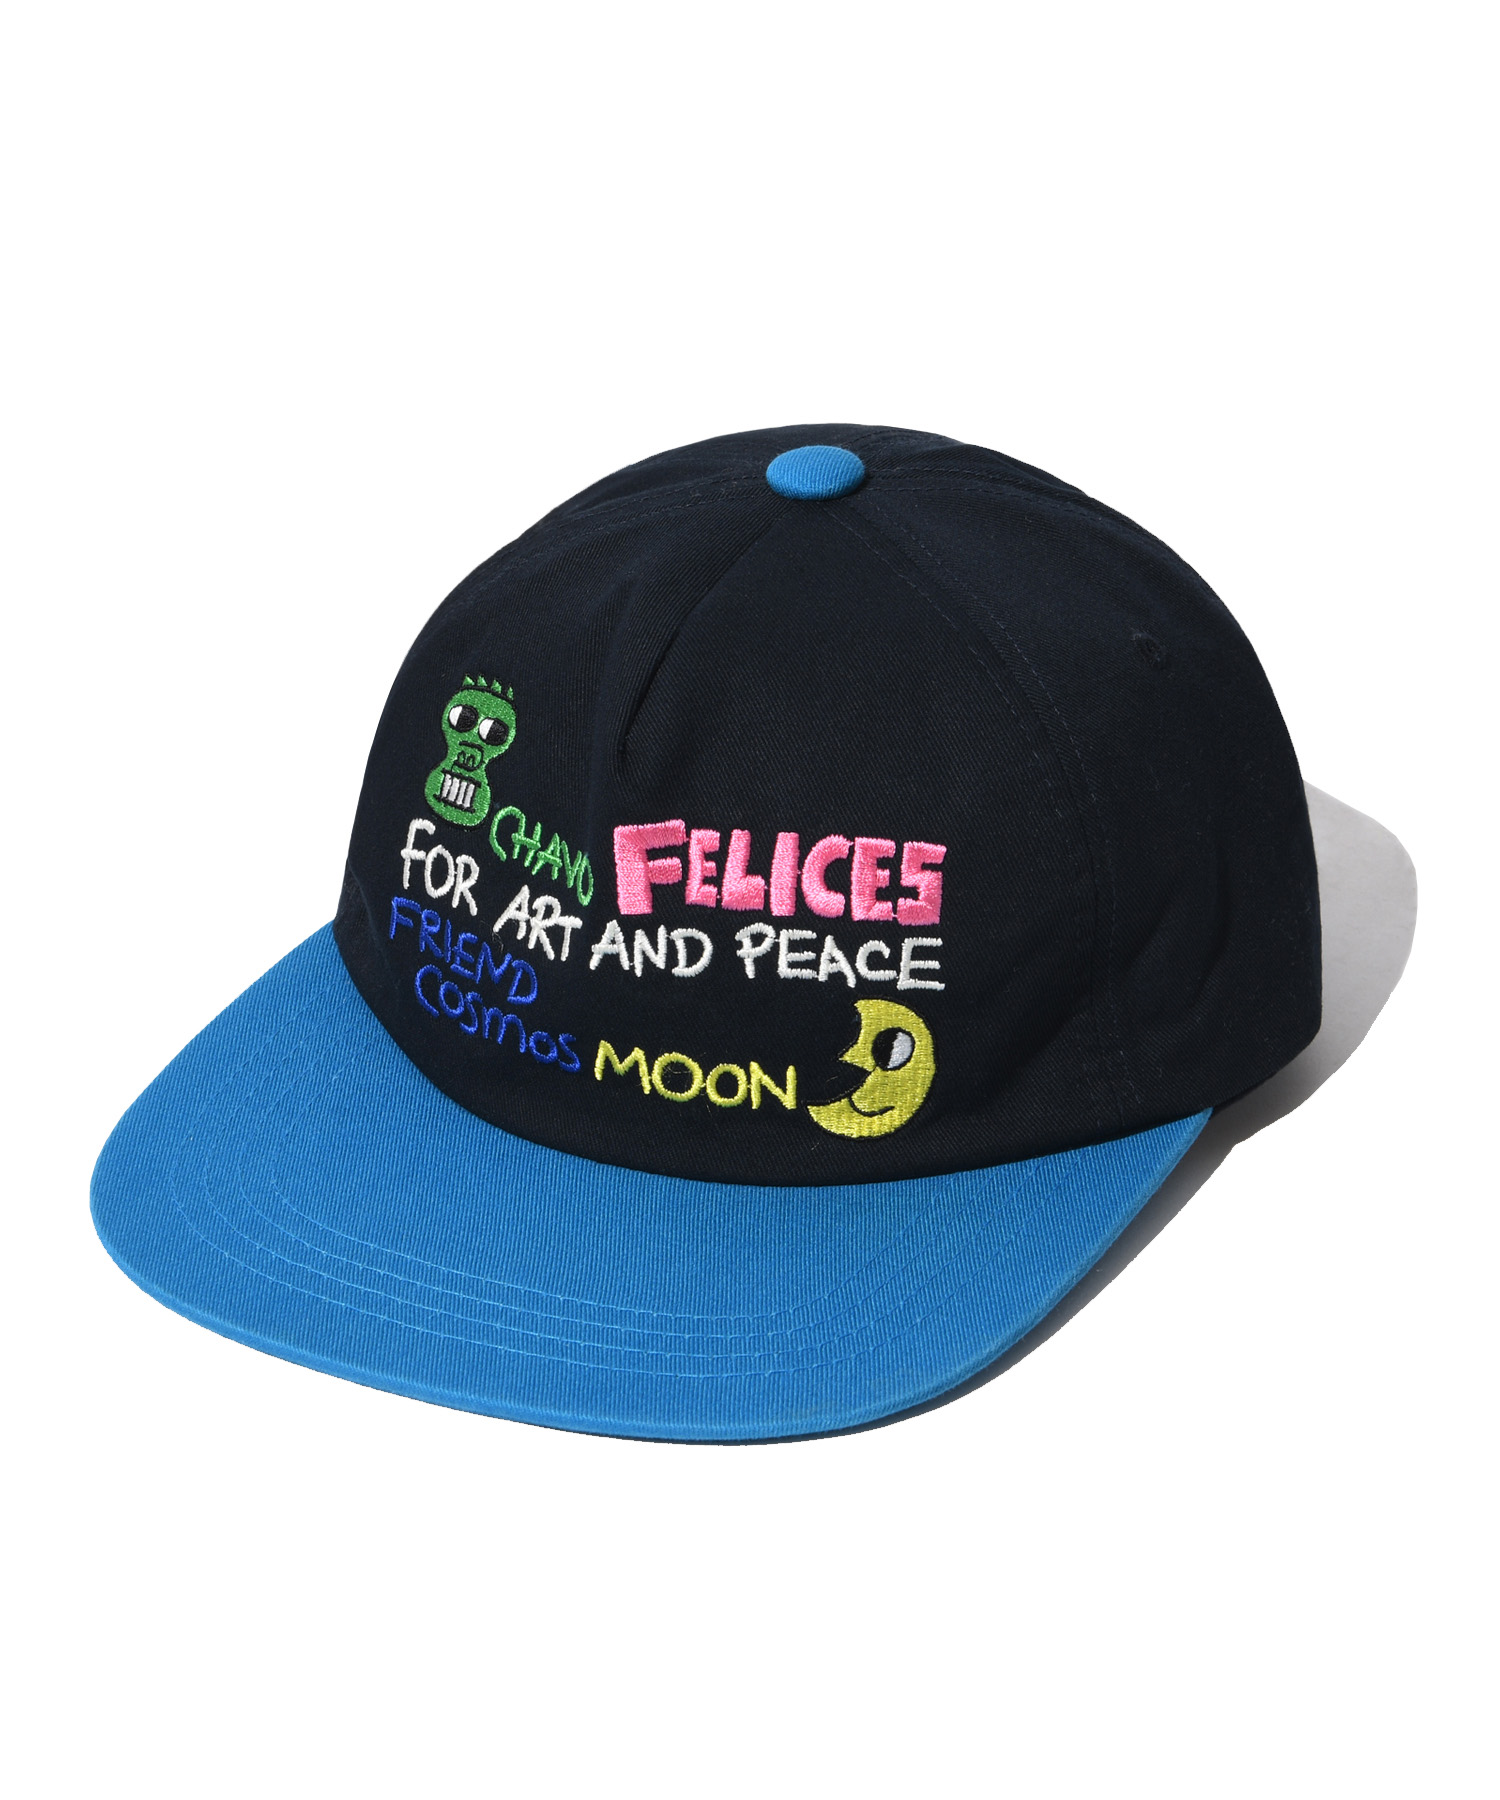 MOON FOR ART AND PEACE 5 PANEL CAP NAVY